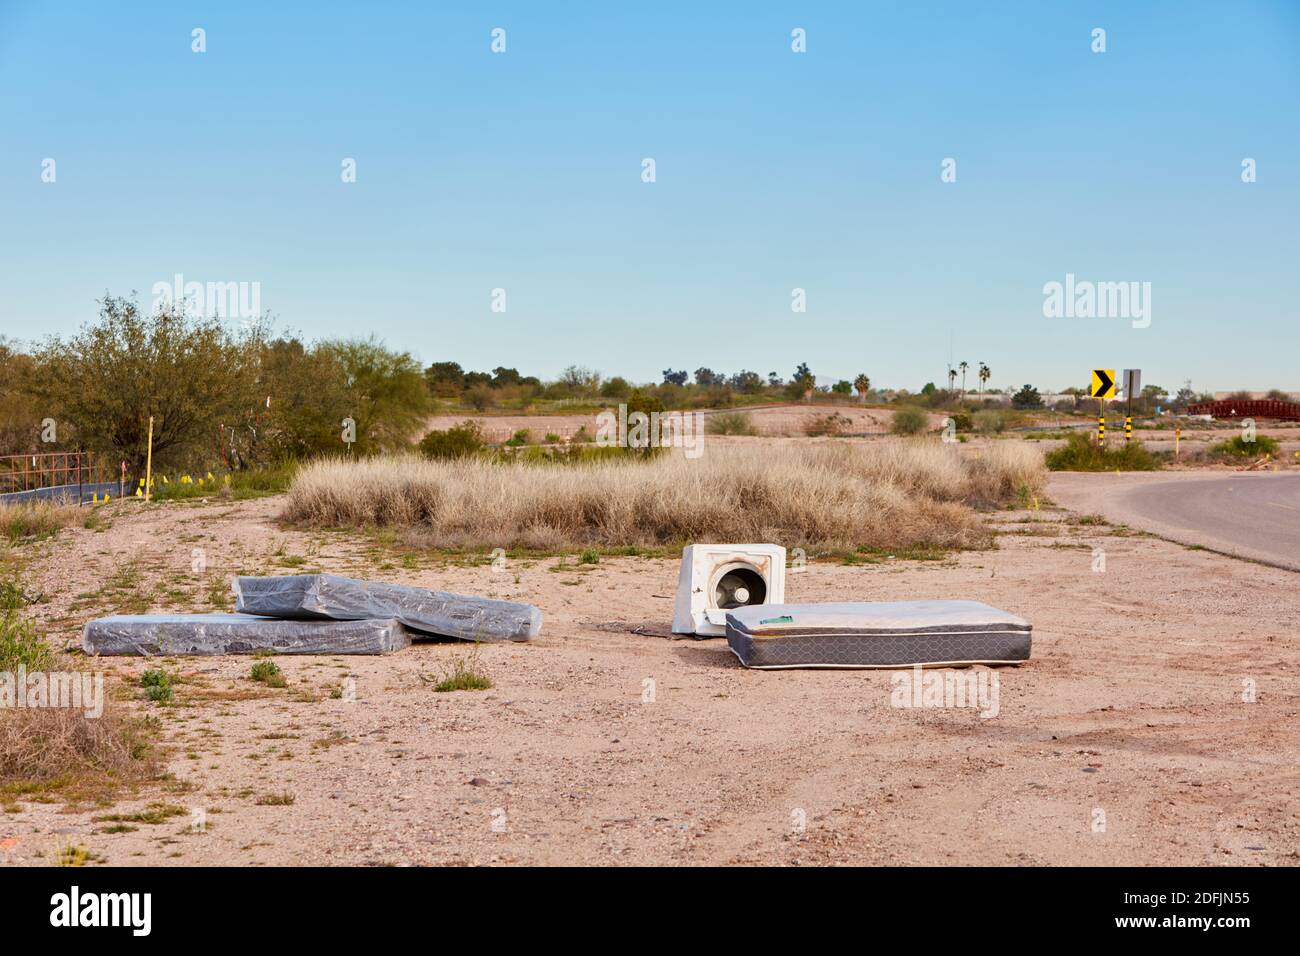 Mattresses and a washing machine illegally discarded in the desert near Tucson, Arizona Stock Photo